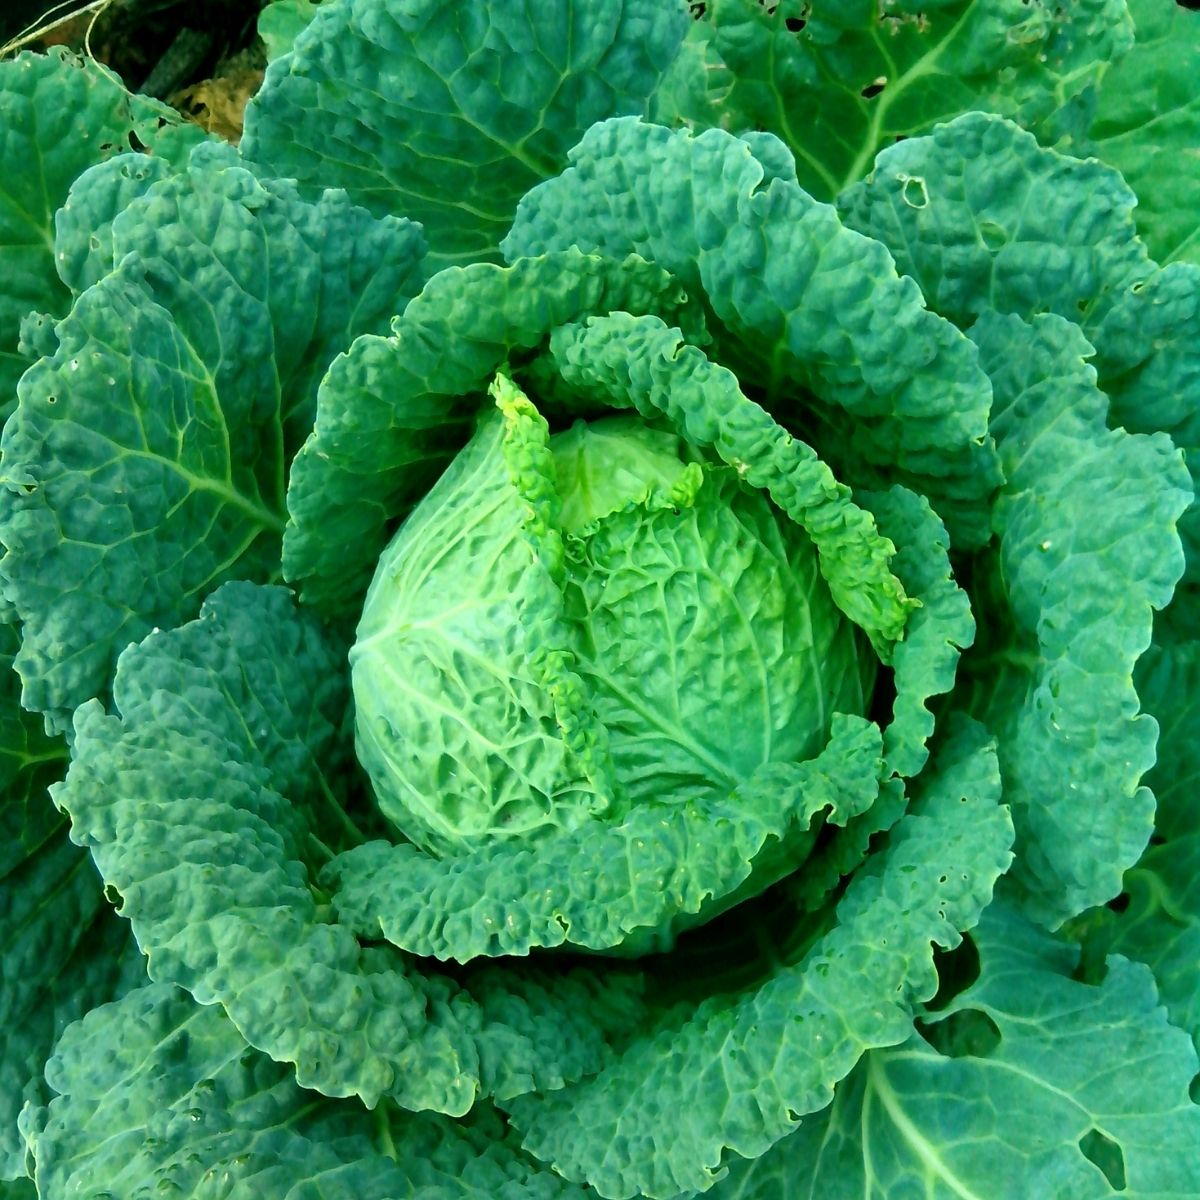 a cabbage head ready to be harvested